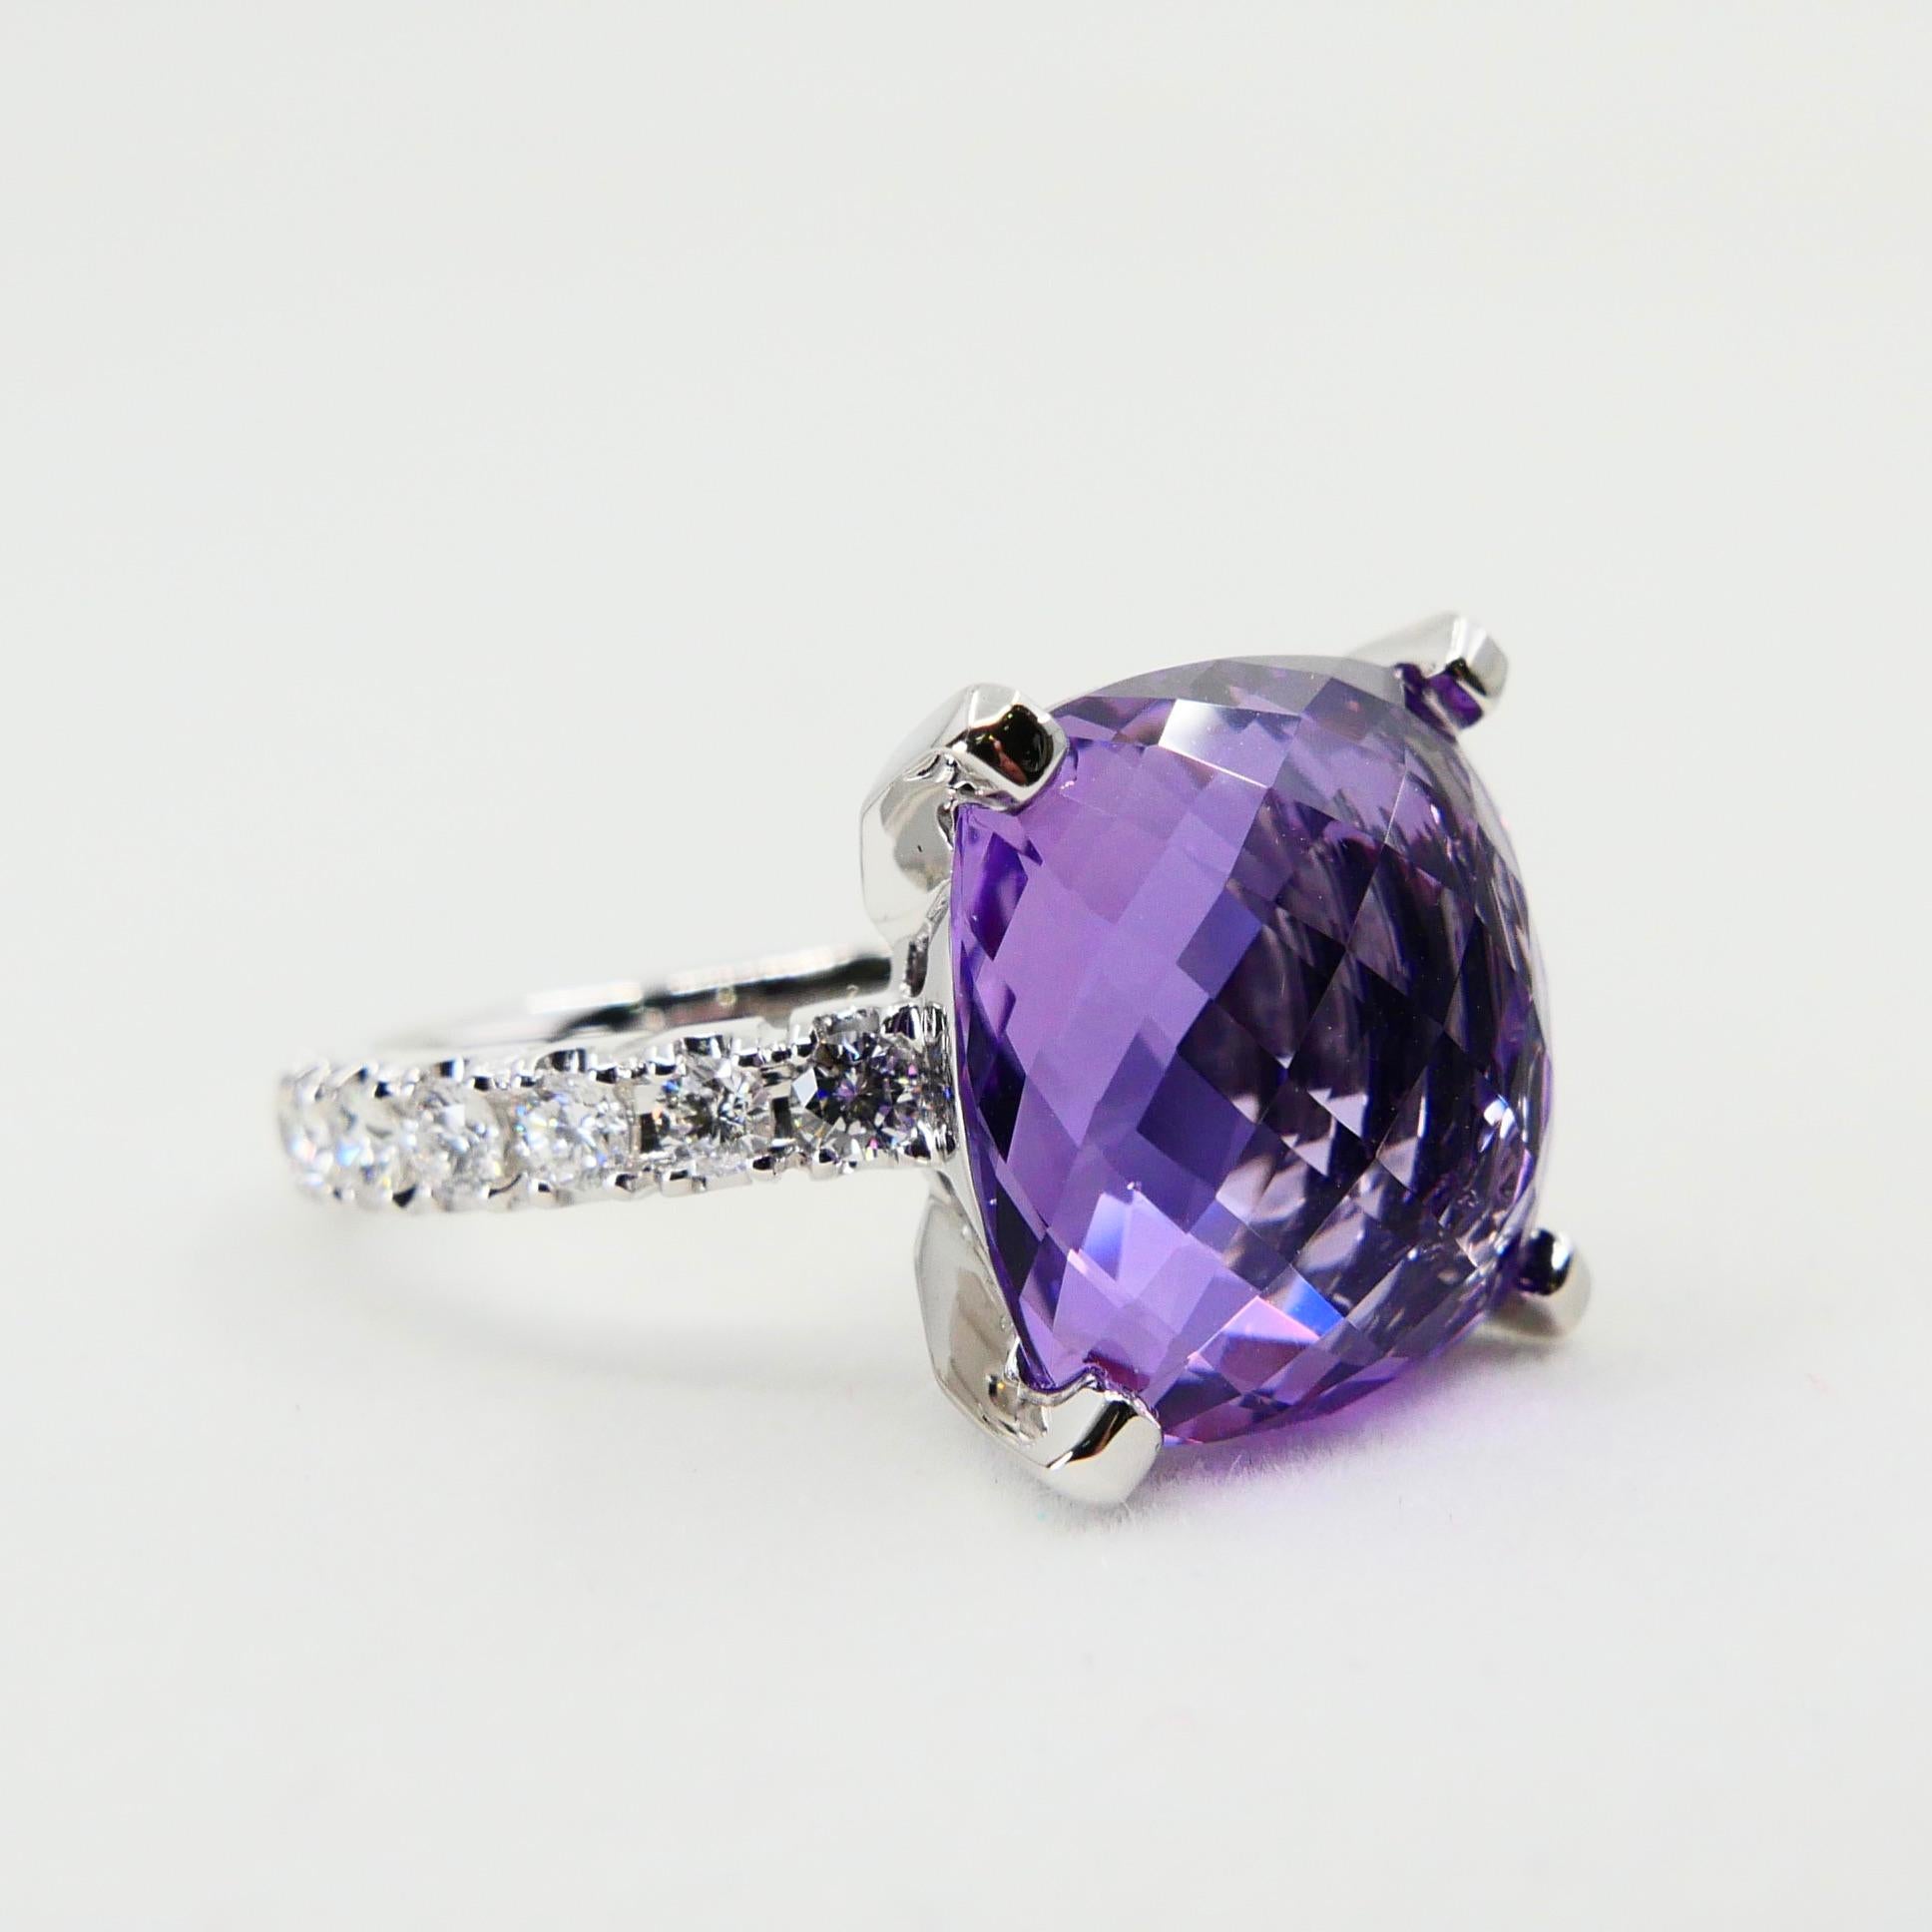 8.67 Carat Faceted Amethyst and Diamond Cocktail Ring, 18 Karat White Gold For Sale 3